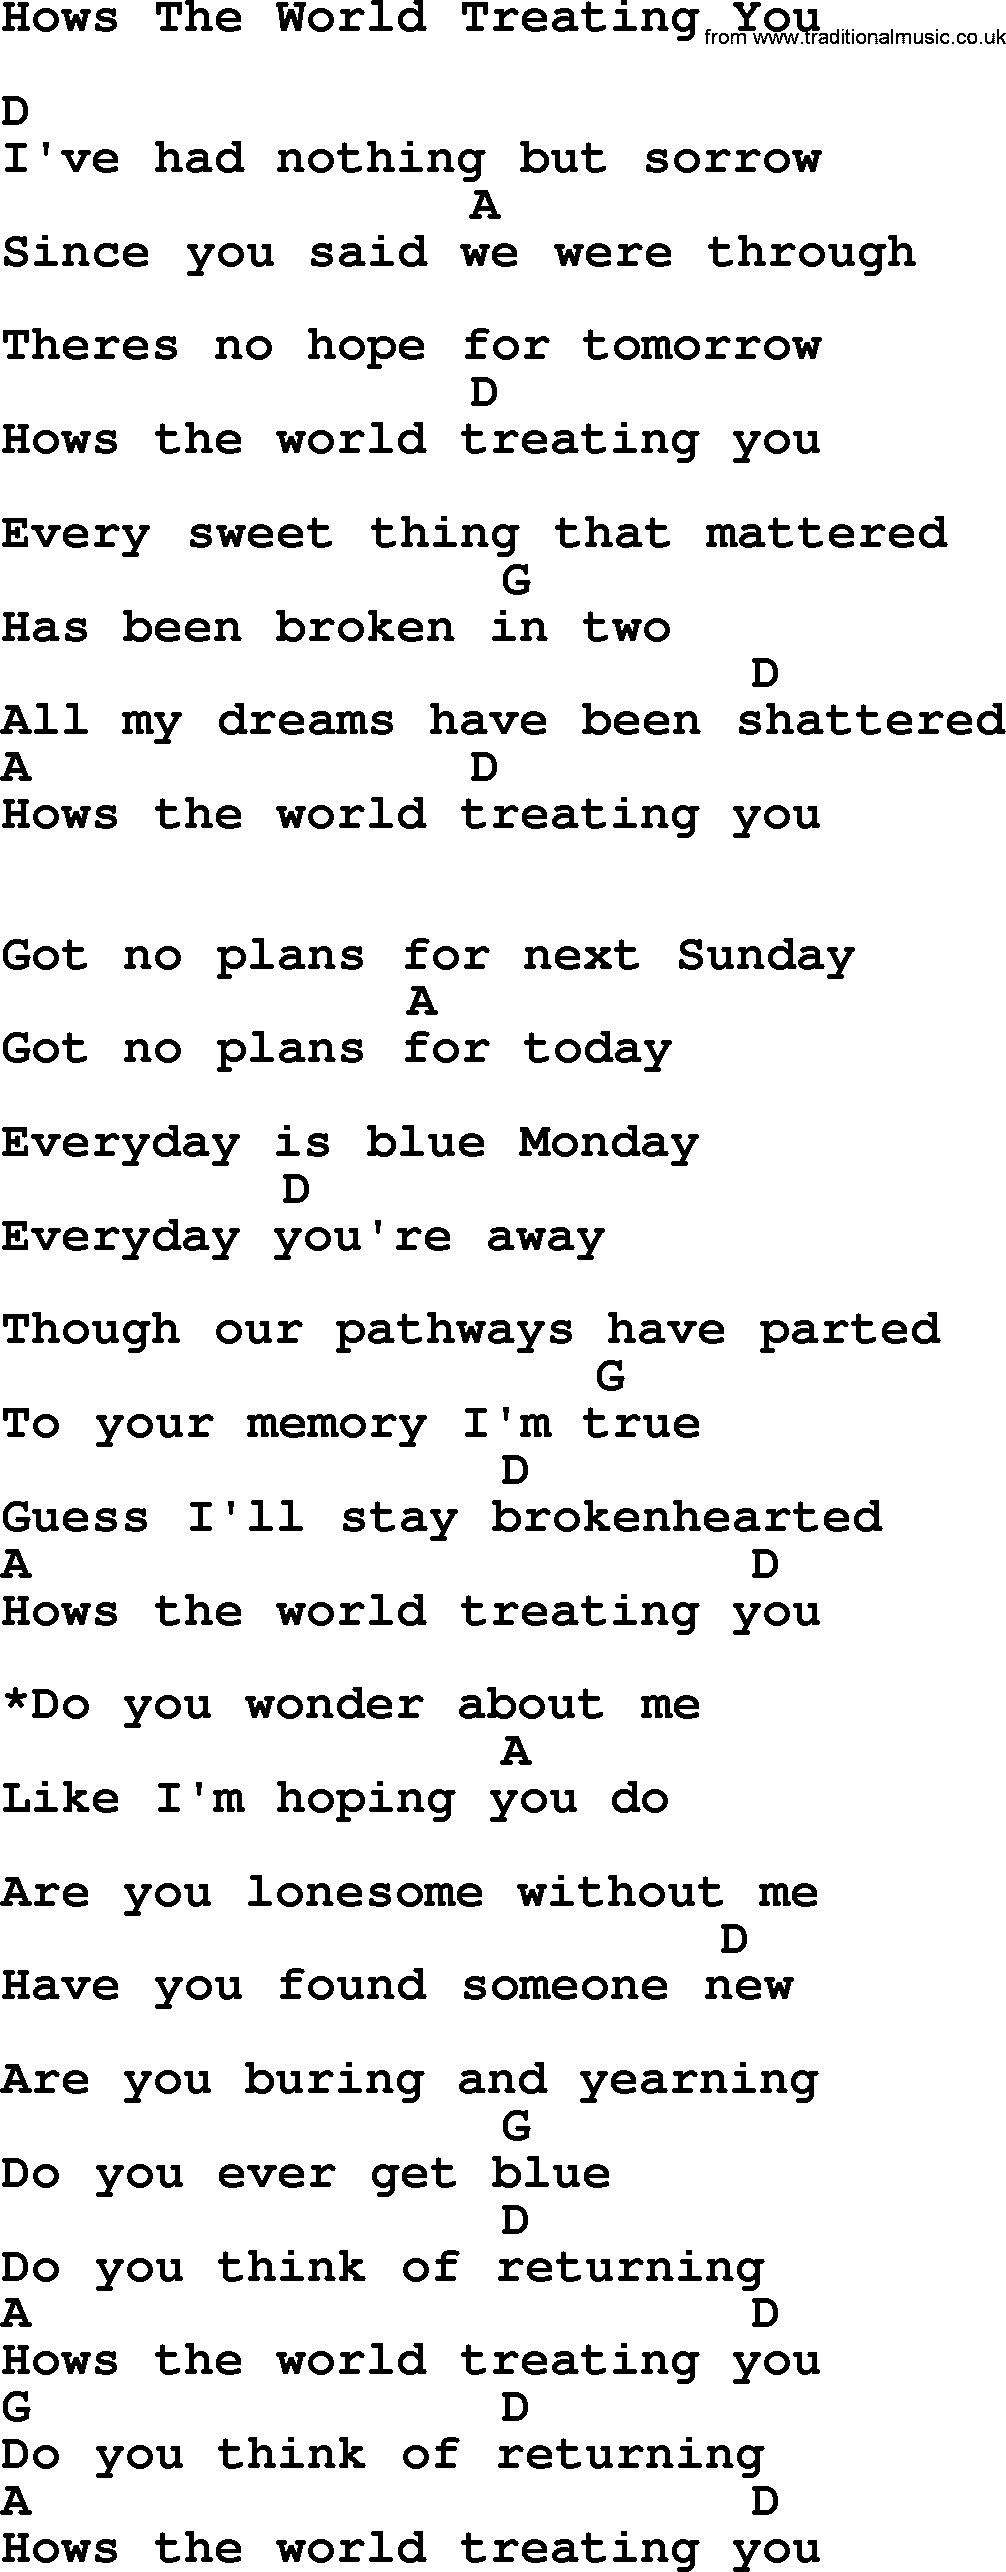 Bluegrass song: Hows The World Treating You, lyrics and chords